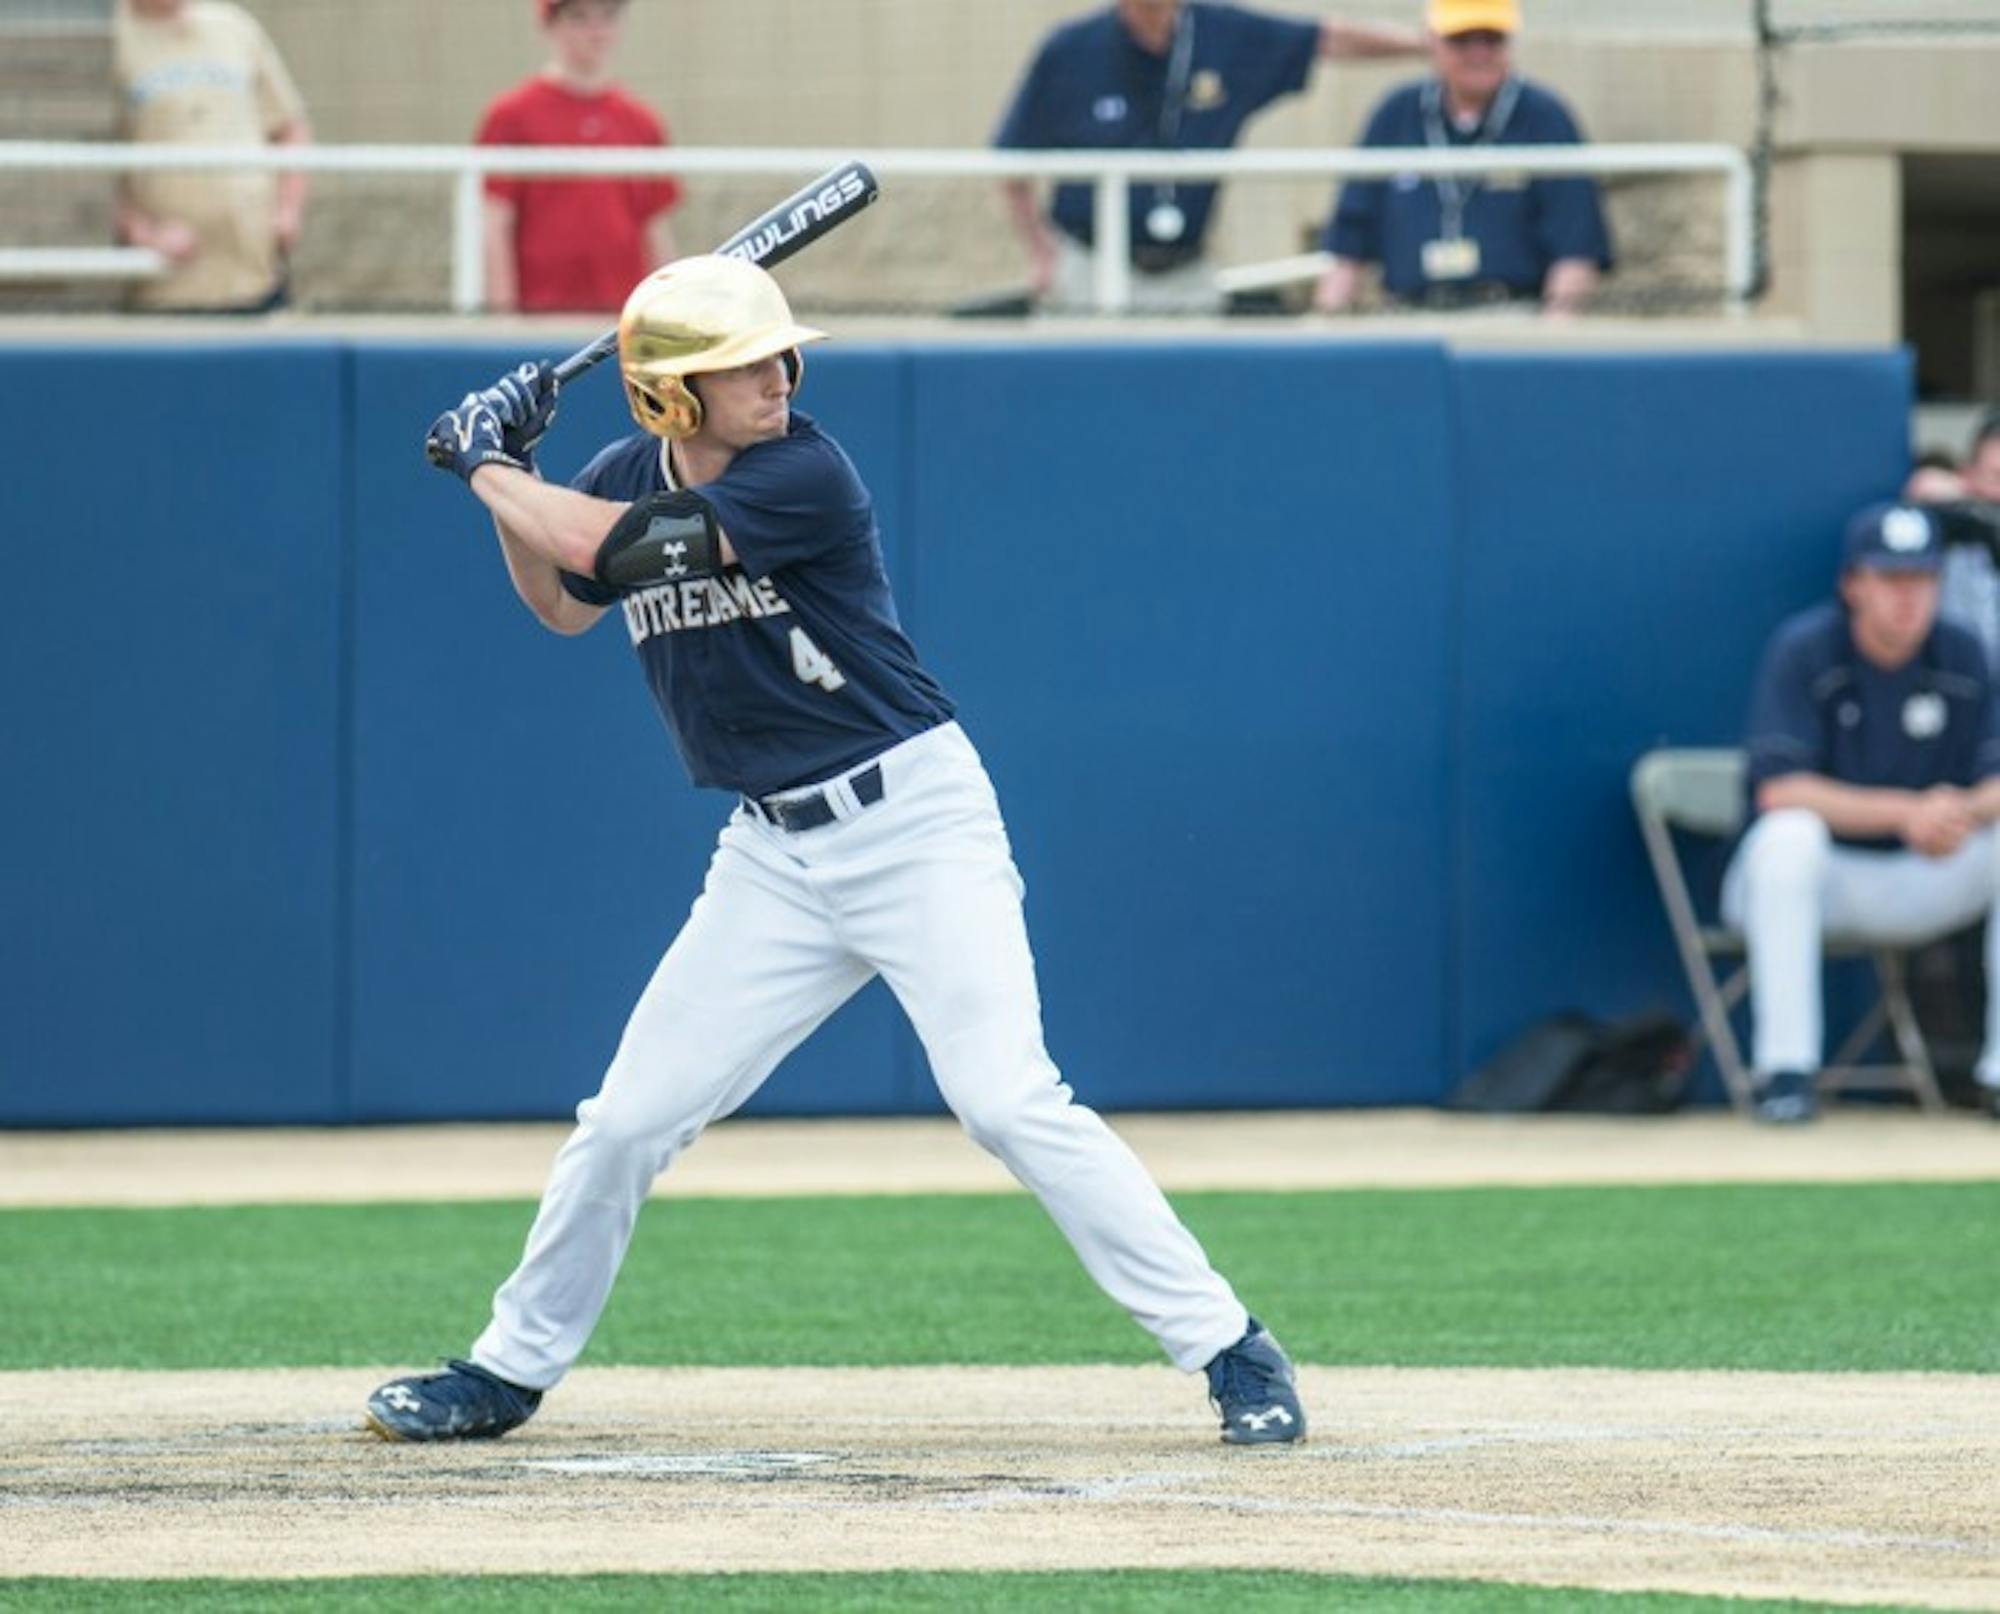 Senior shortstop Lane Richards readies for a pitch during Notre Dame’s 7-2 win over NC State on April 18, 2015 at Eck Stadium.